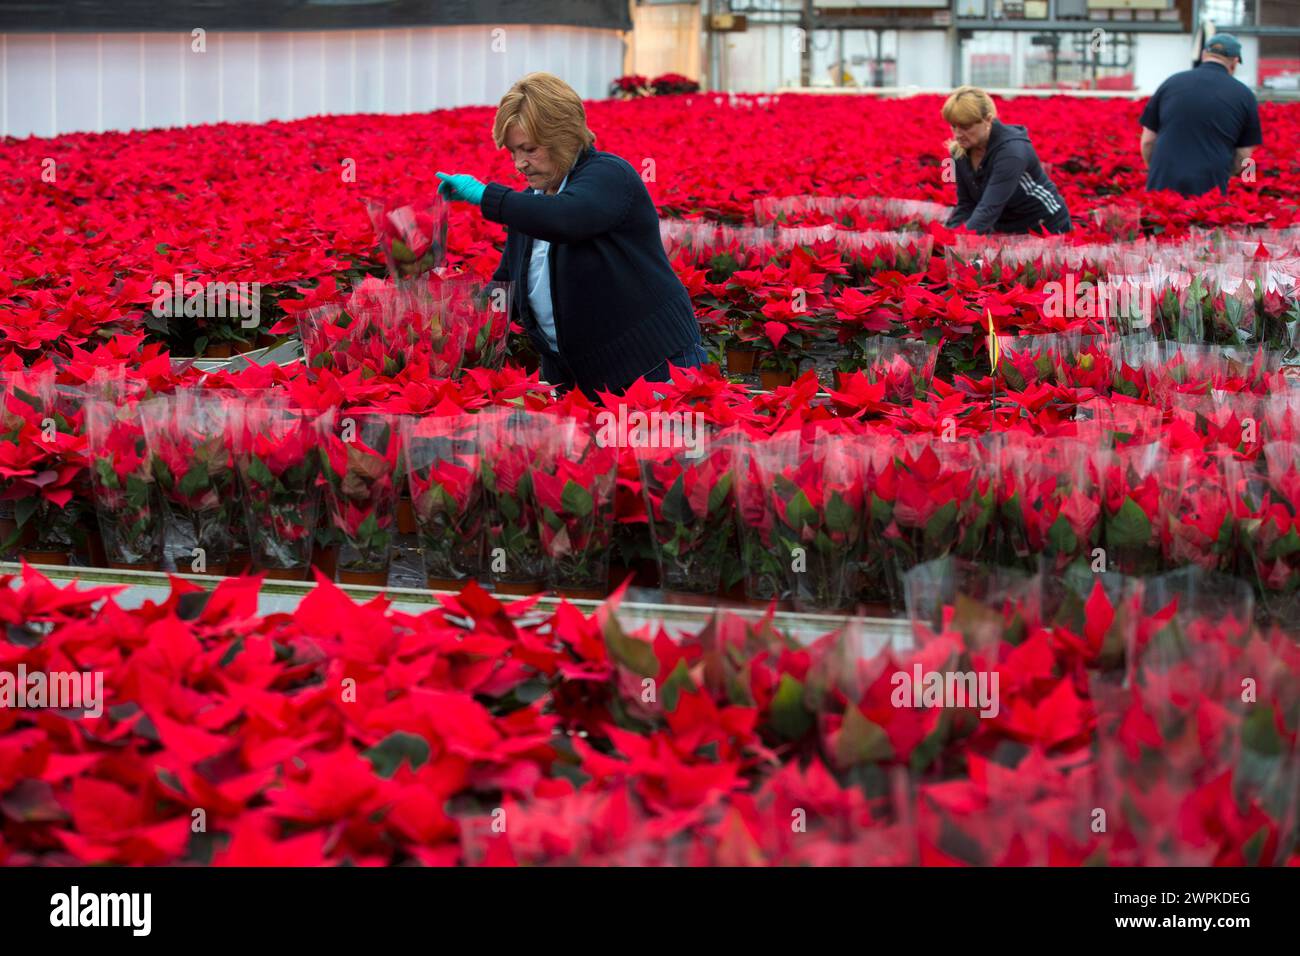 27/11/14  Nursery workers begin to grade and pack 450,000 poinsettias, Bordon Hill Nurseries, near Stratford-upon-Avon. The festive plants are grown u Stock Photo